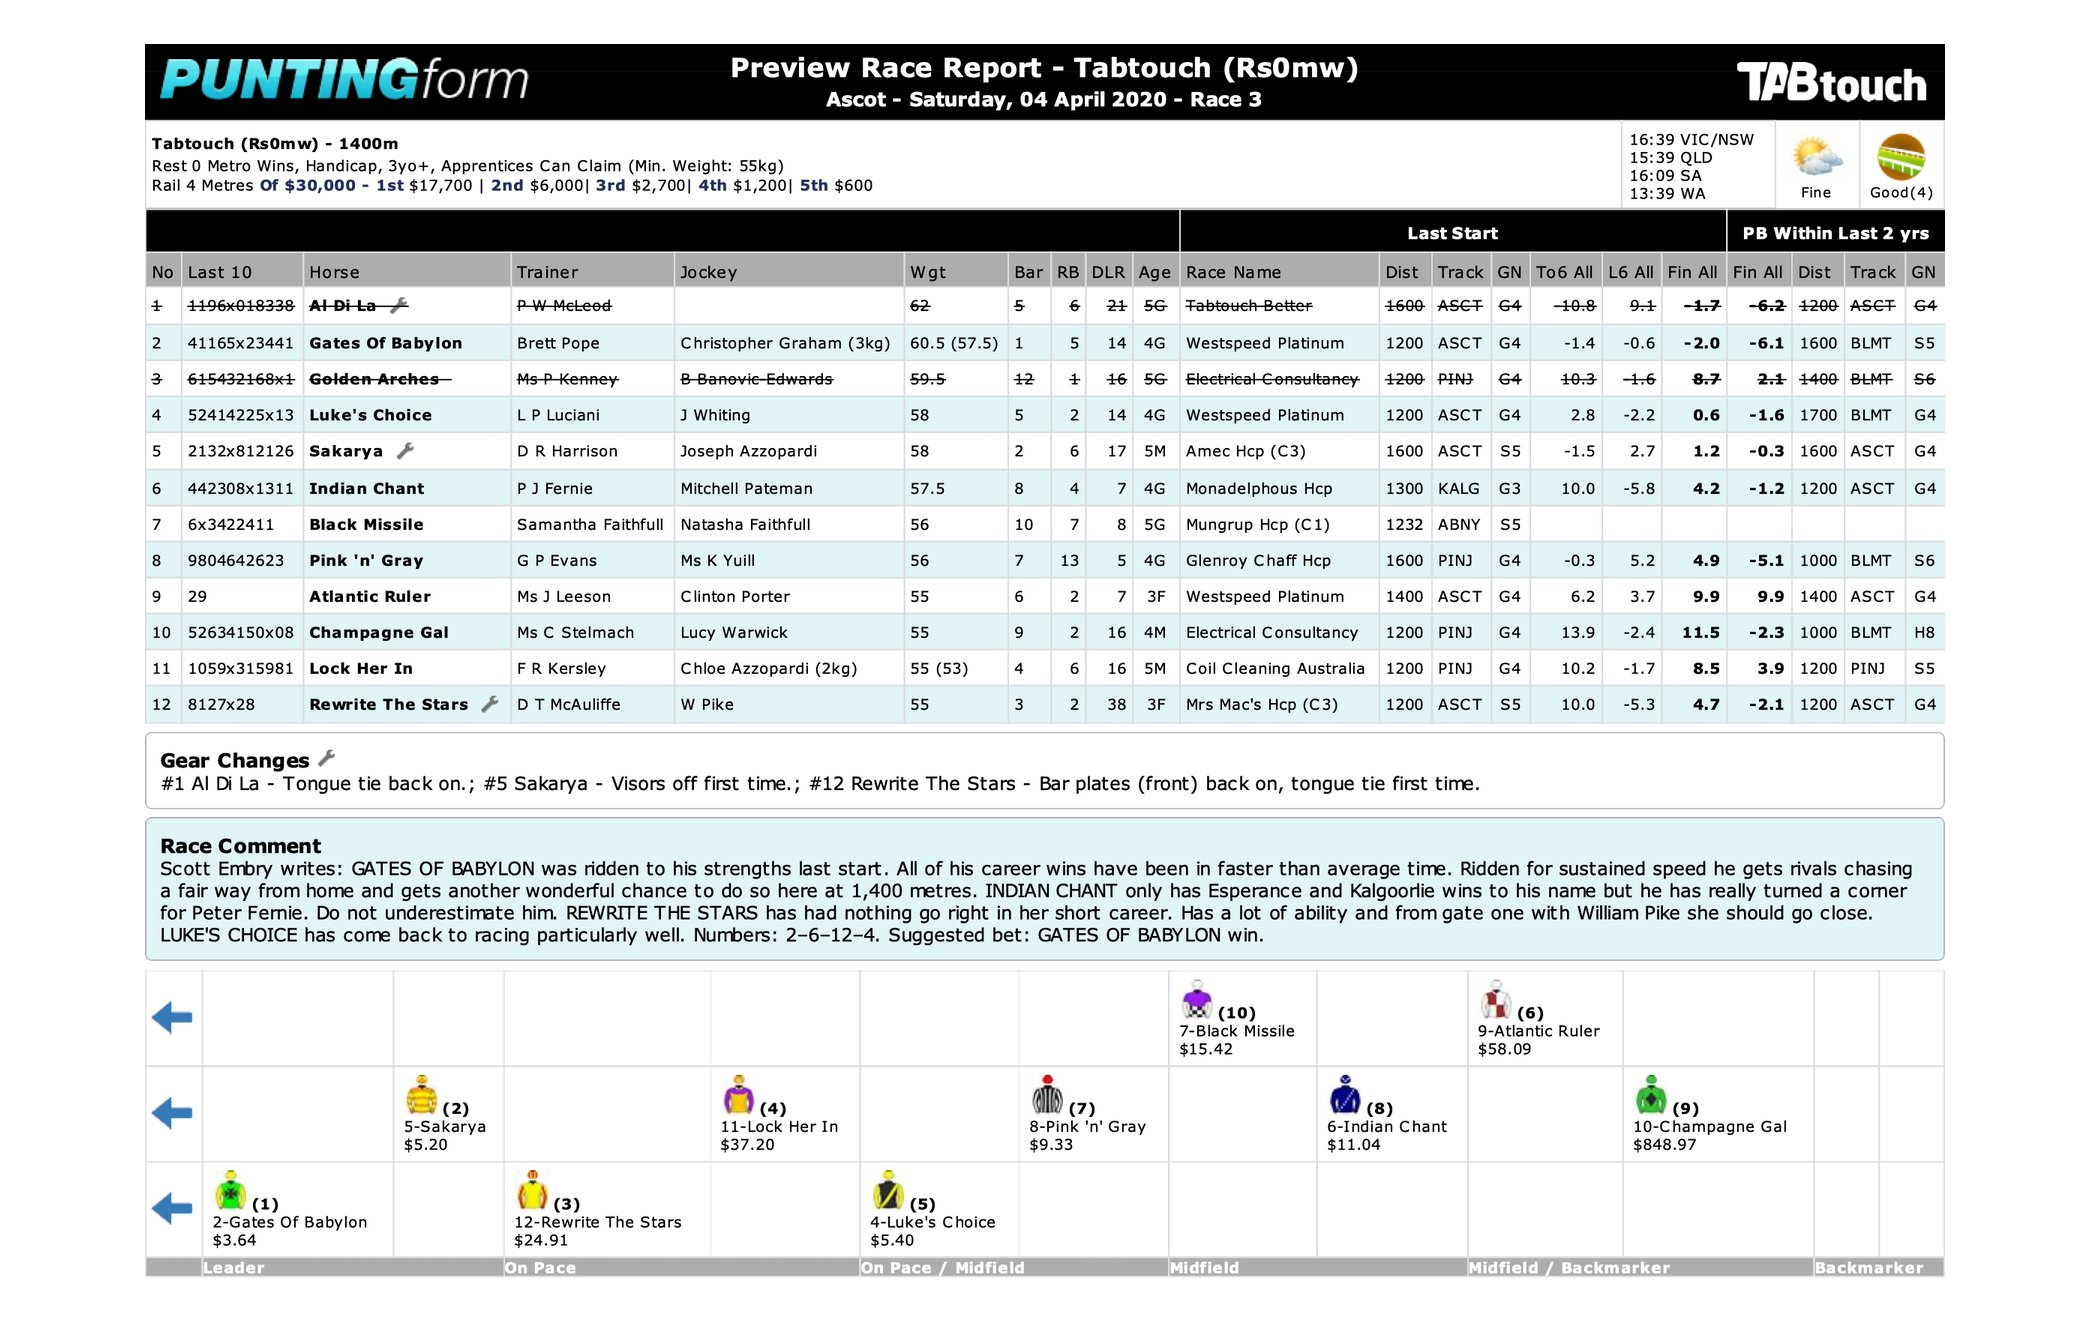 Punting Form reports